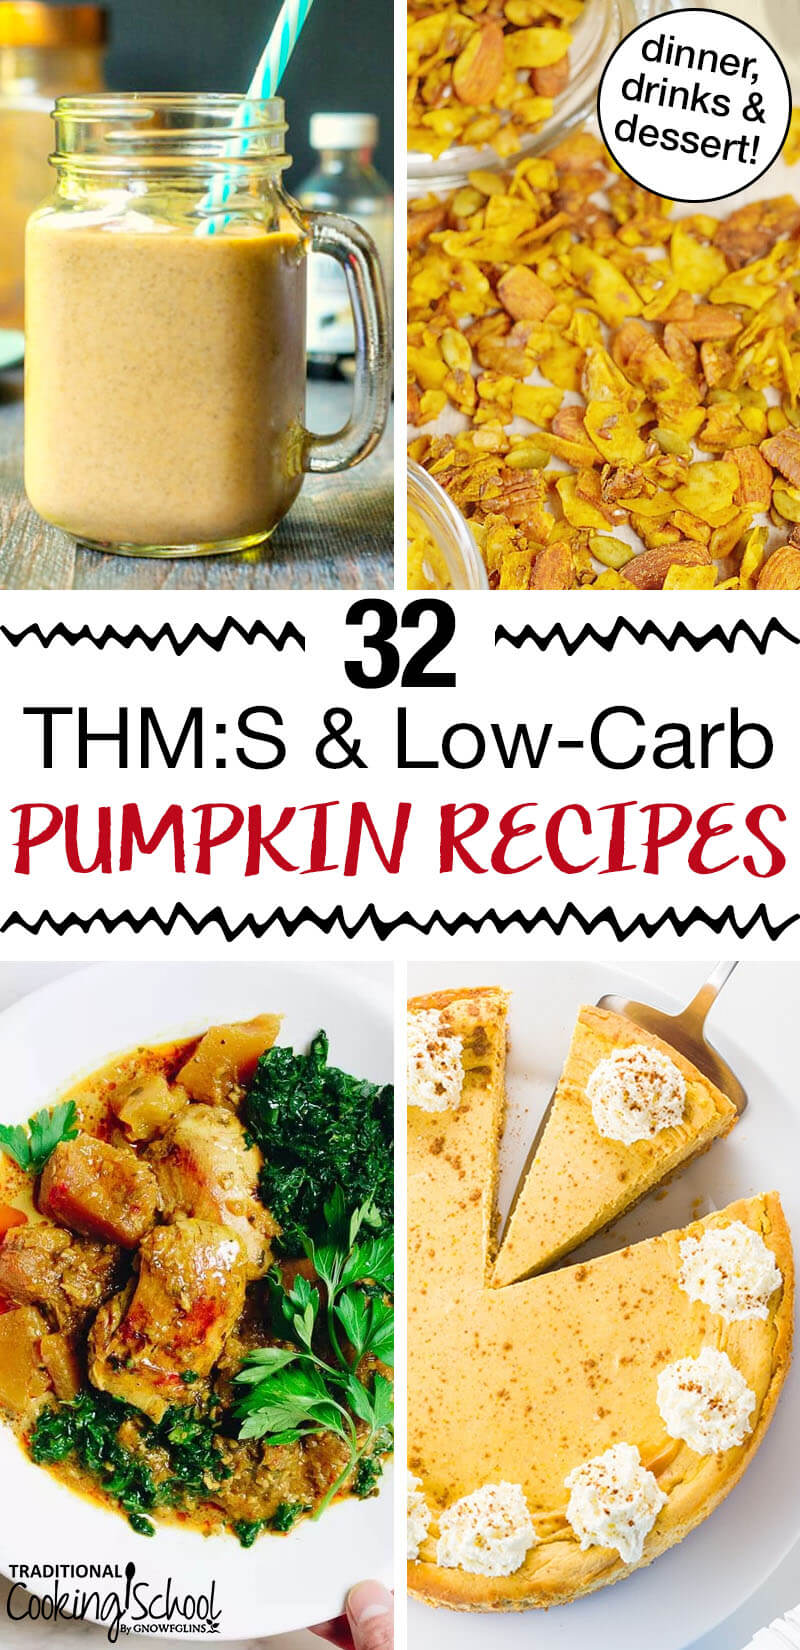 photo collage of pumpkin recipes including pumpkin pie and a pumpkin smoothie with text overlay: "32 THM:S & Low-Carb Pumpkin Recipes"